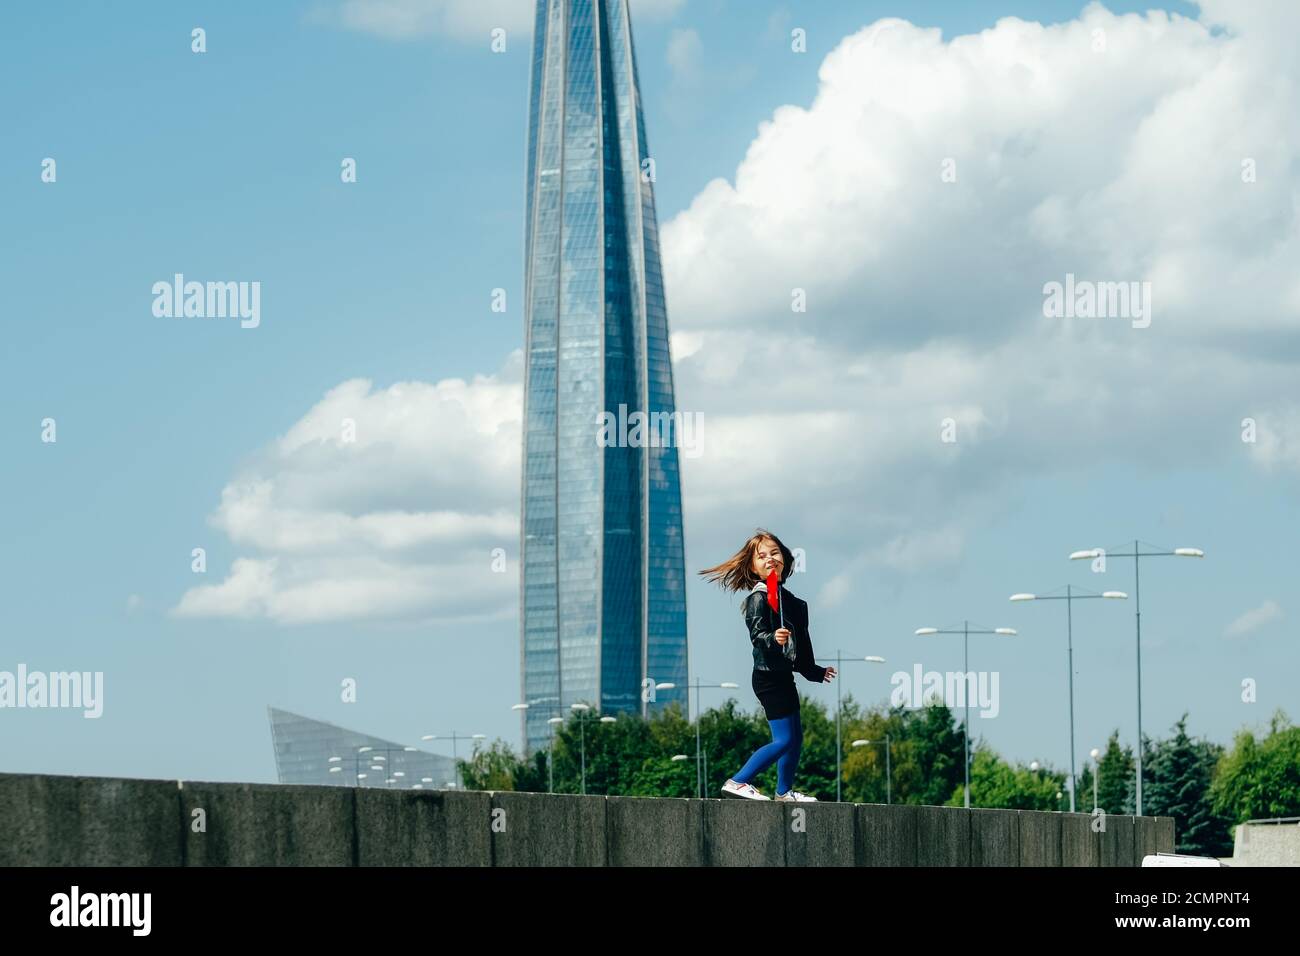 Happy girl with red wind spinner walking on the embankment on blue sky urban background. Freedom concept Stock Photo